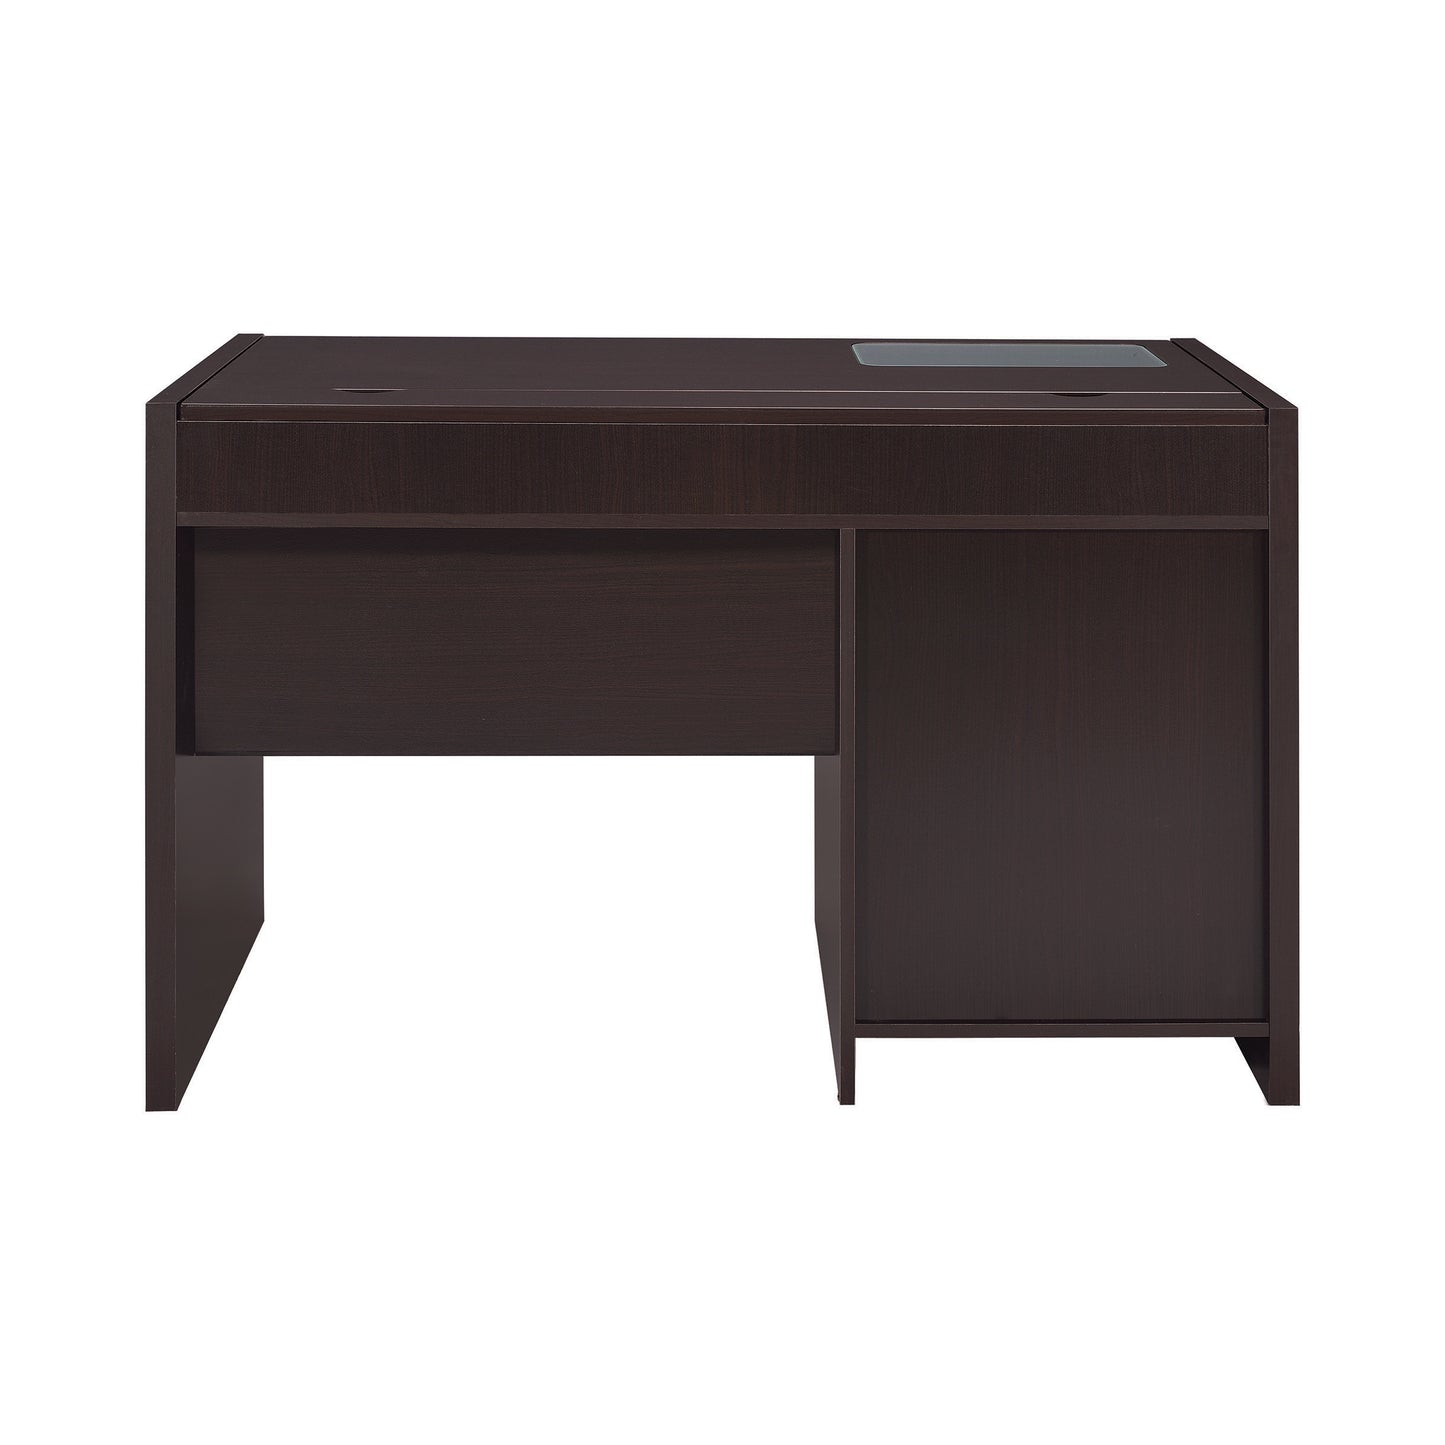 Halston 3-Drawer Rectangular Connect-It Office Desk Cappuccino - 800702